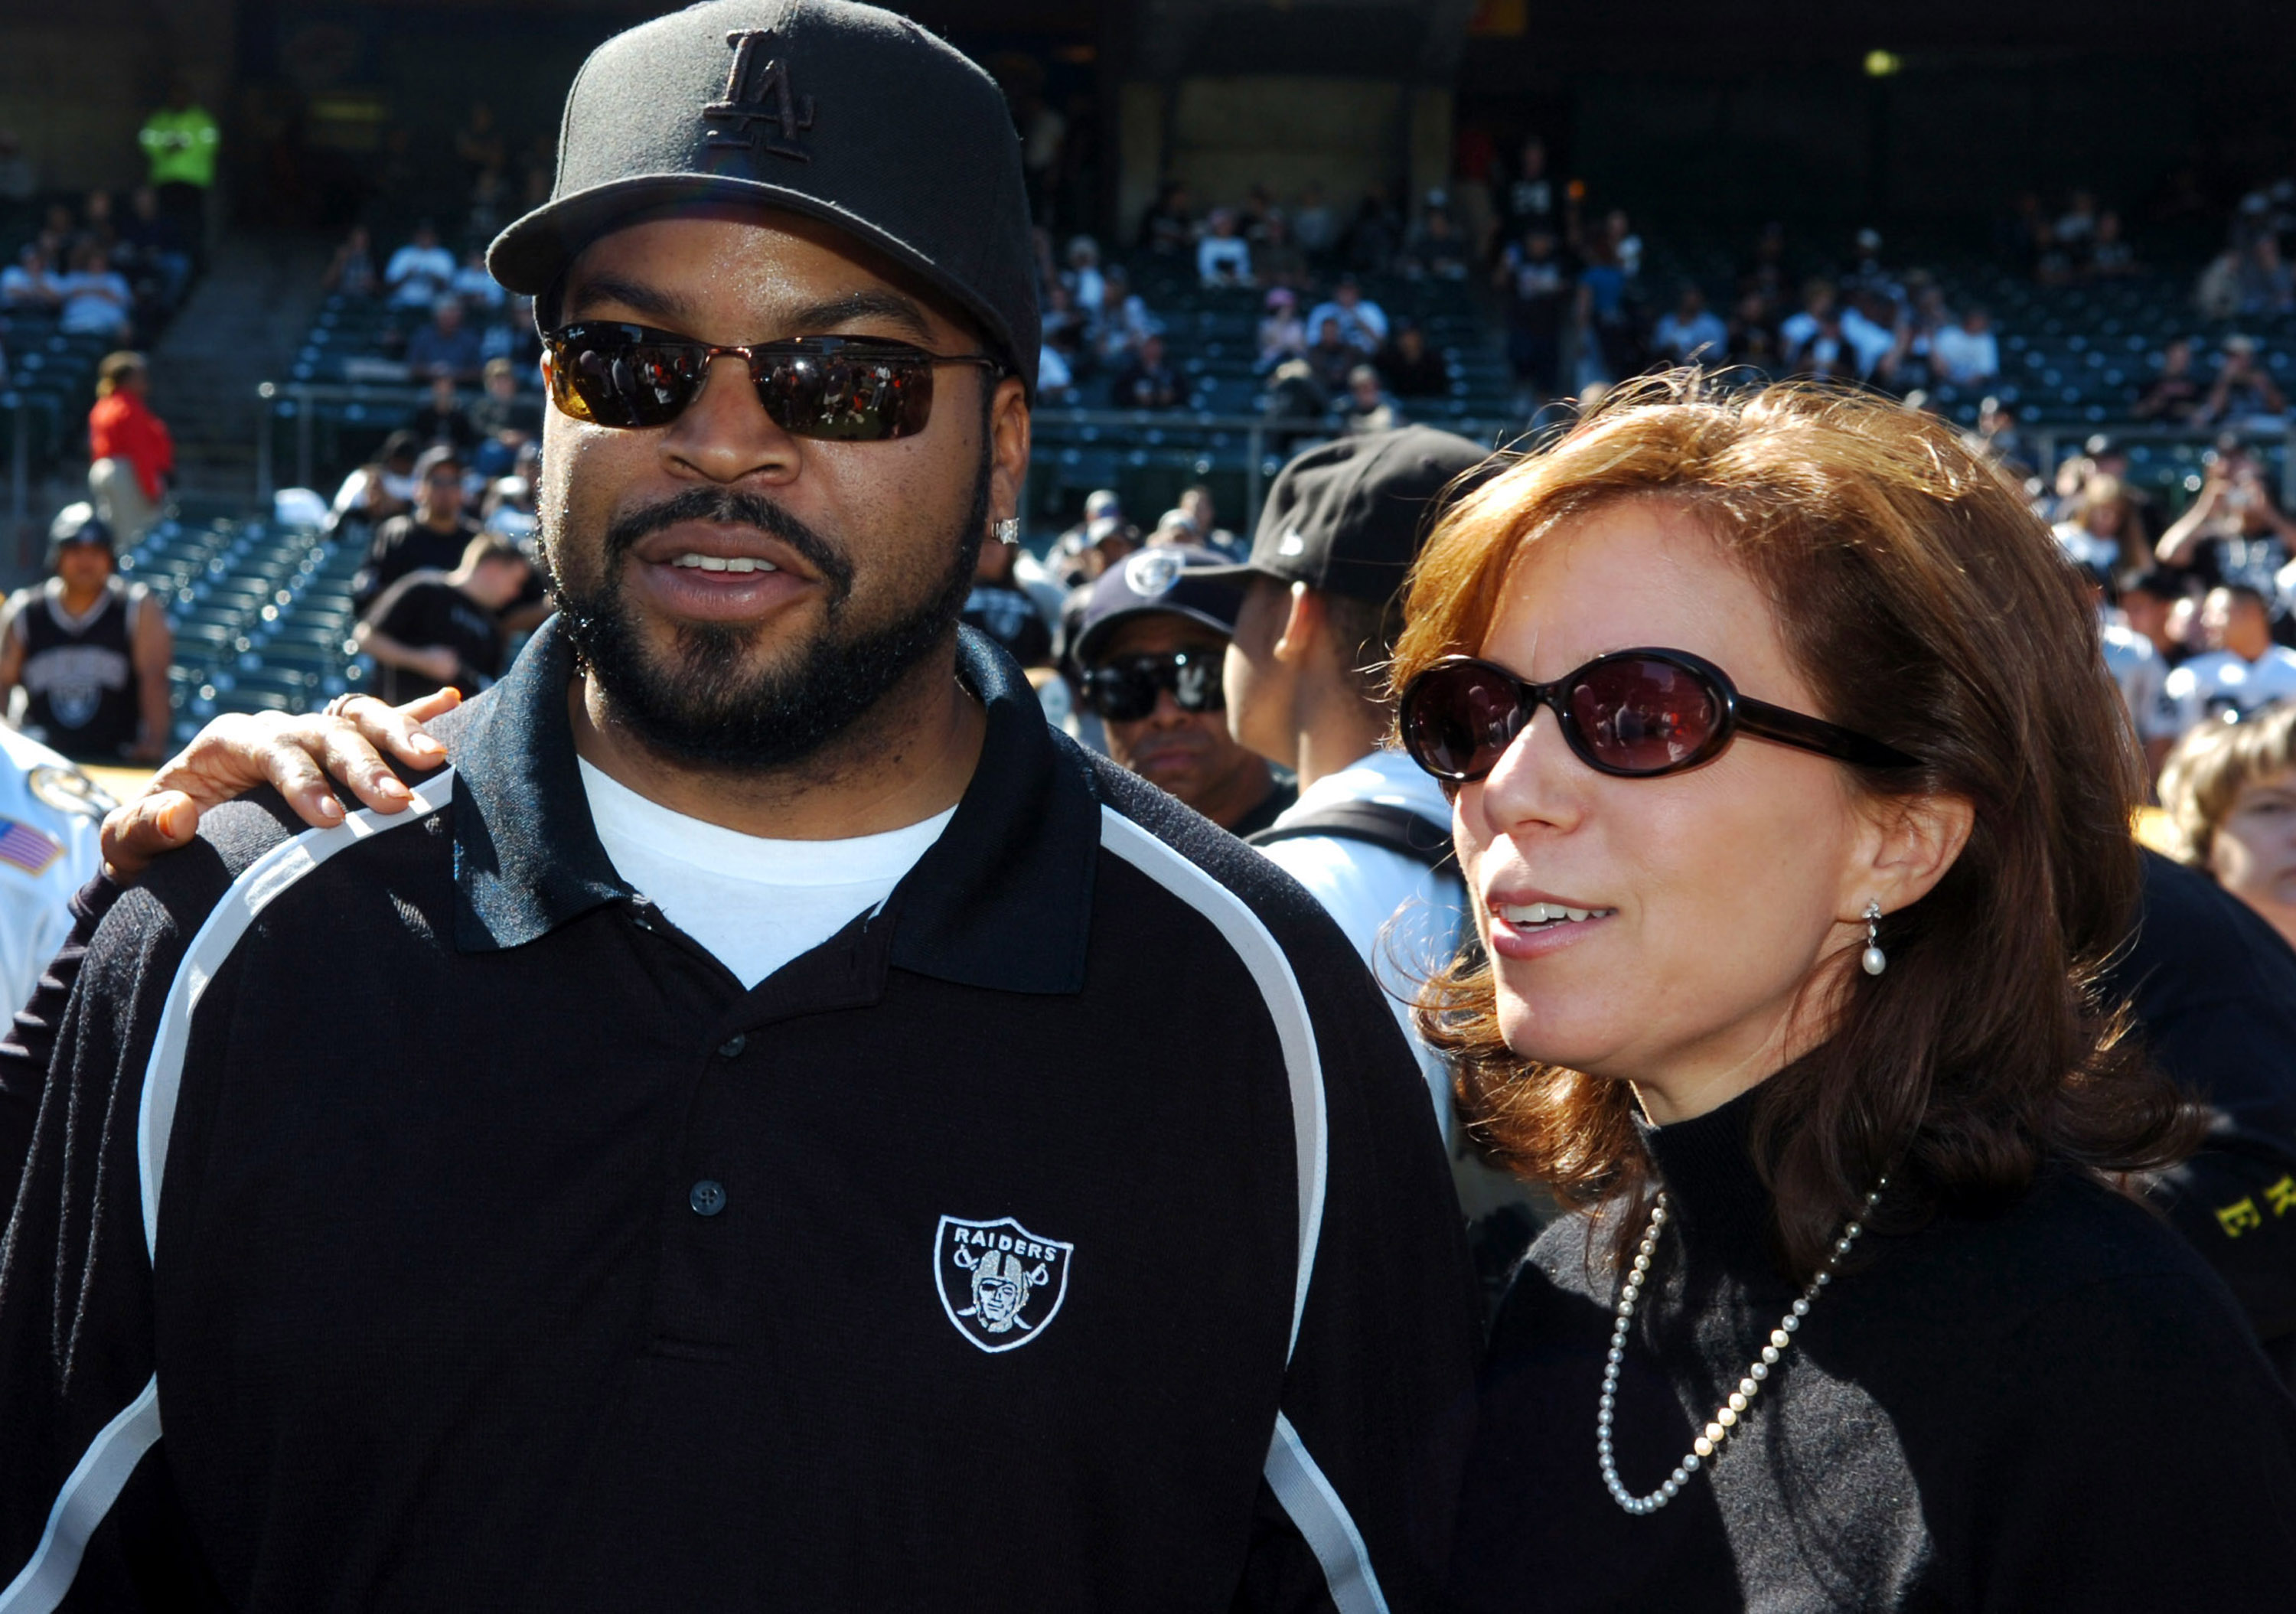 Ice Cube aka O'Shea Jackson poses with Oakland Raider CEO Amy Trask before game against the San Diego Chargers at McAfee Coliseum on Sunday, October 16, 2005. (Photo by Kirby Lee/NFLPhotoLibrary)